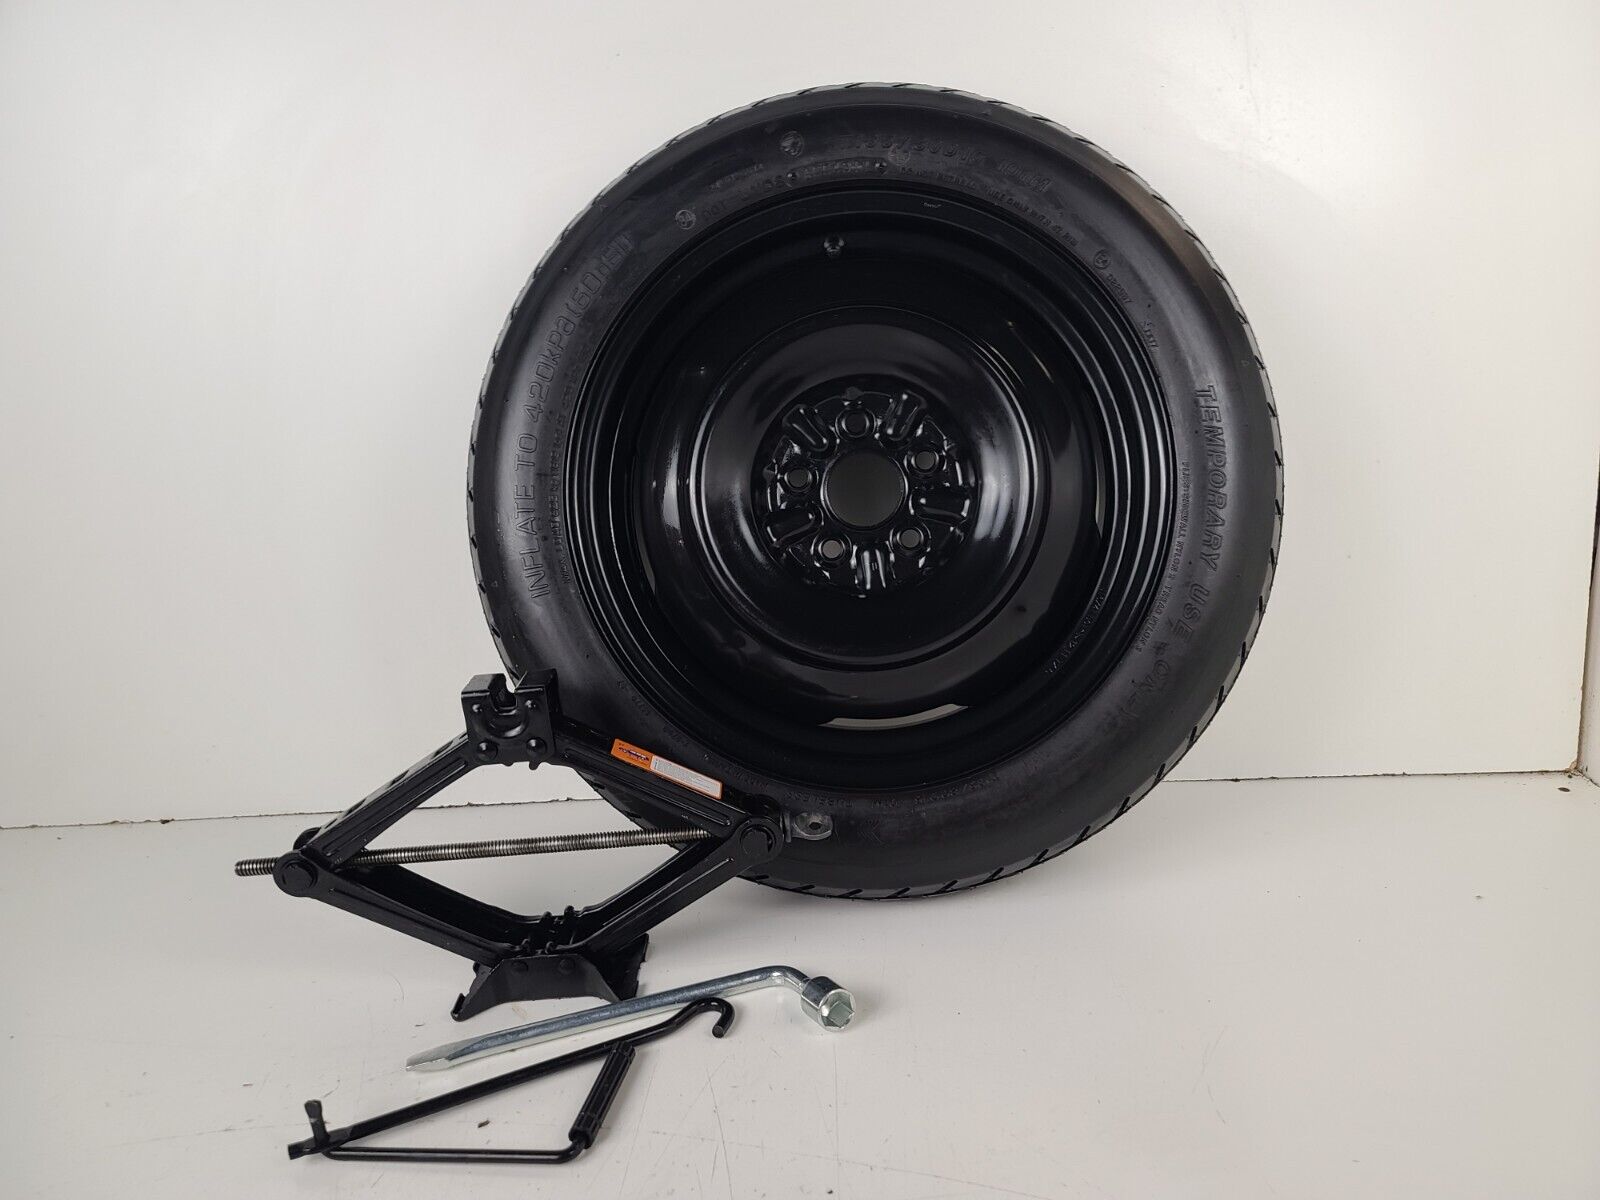 Spare Tire 16'' W/Jack Kits Fits:2003-2019 Toyota Corolla Compact Donut